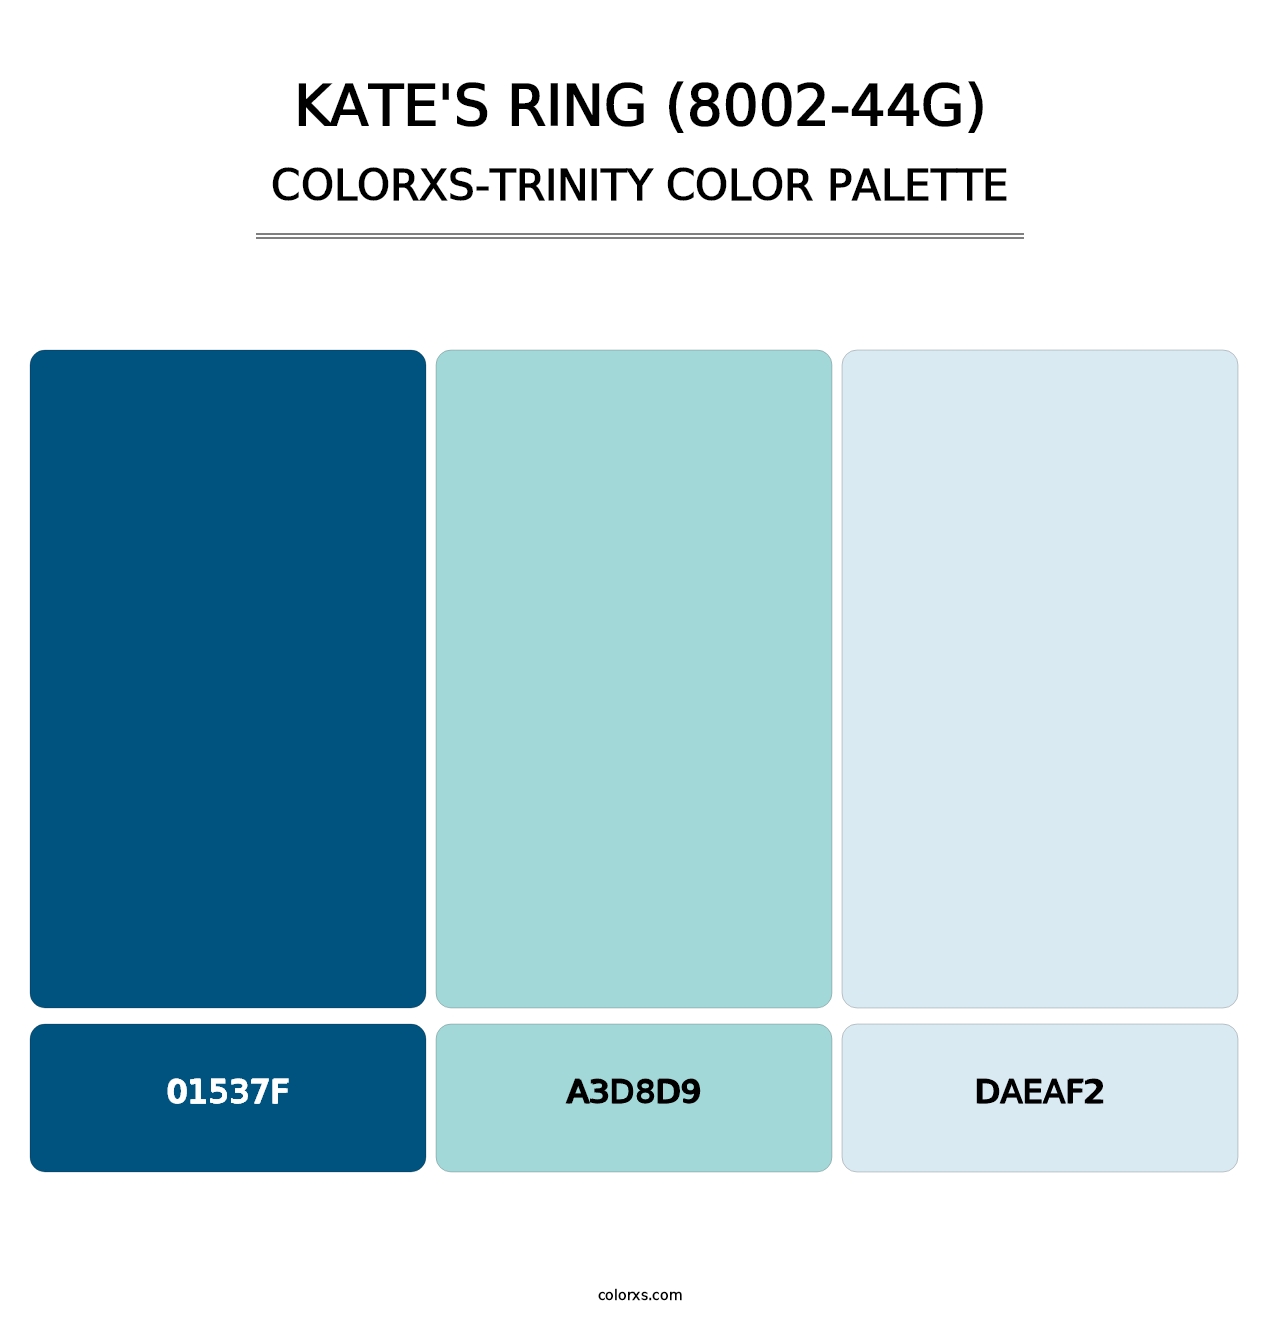 Kate's Ring (8002-44G) - Colorxs Trinity Palette